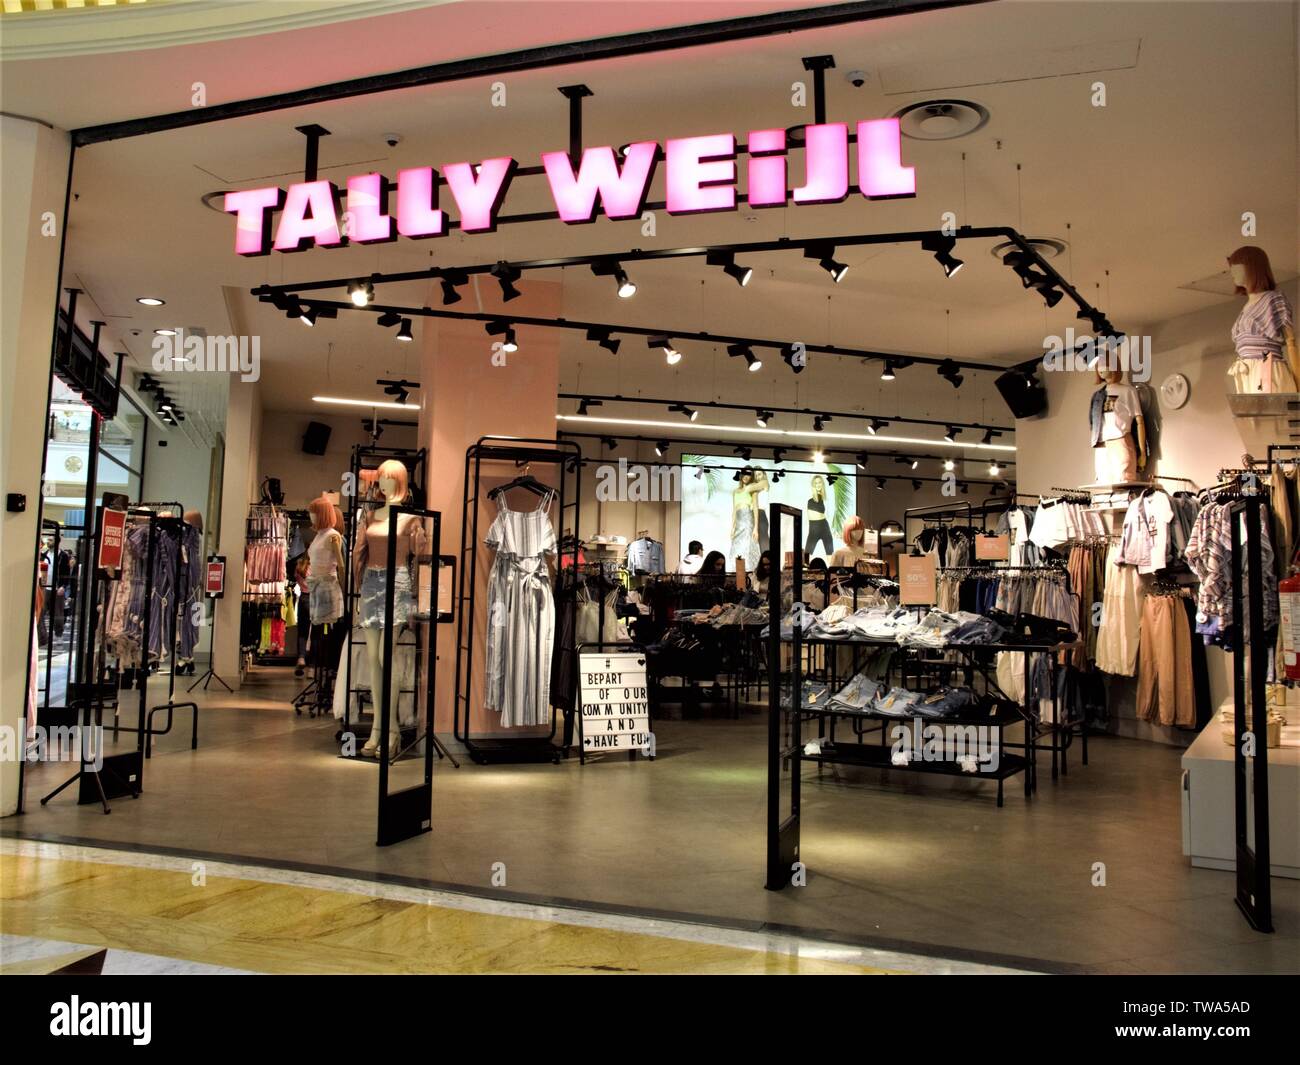 https://c8.alamy.com/comp/TWA5AD/tally-weijl-fashion-store-entrance-in-euroma-2-shopping-center-in-rome-TWA5AD.jpg